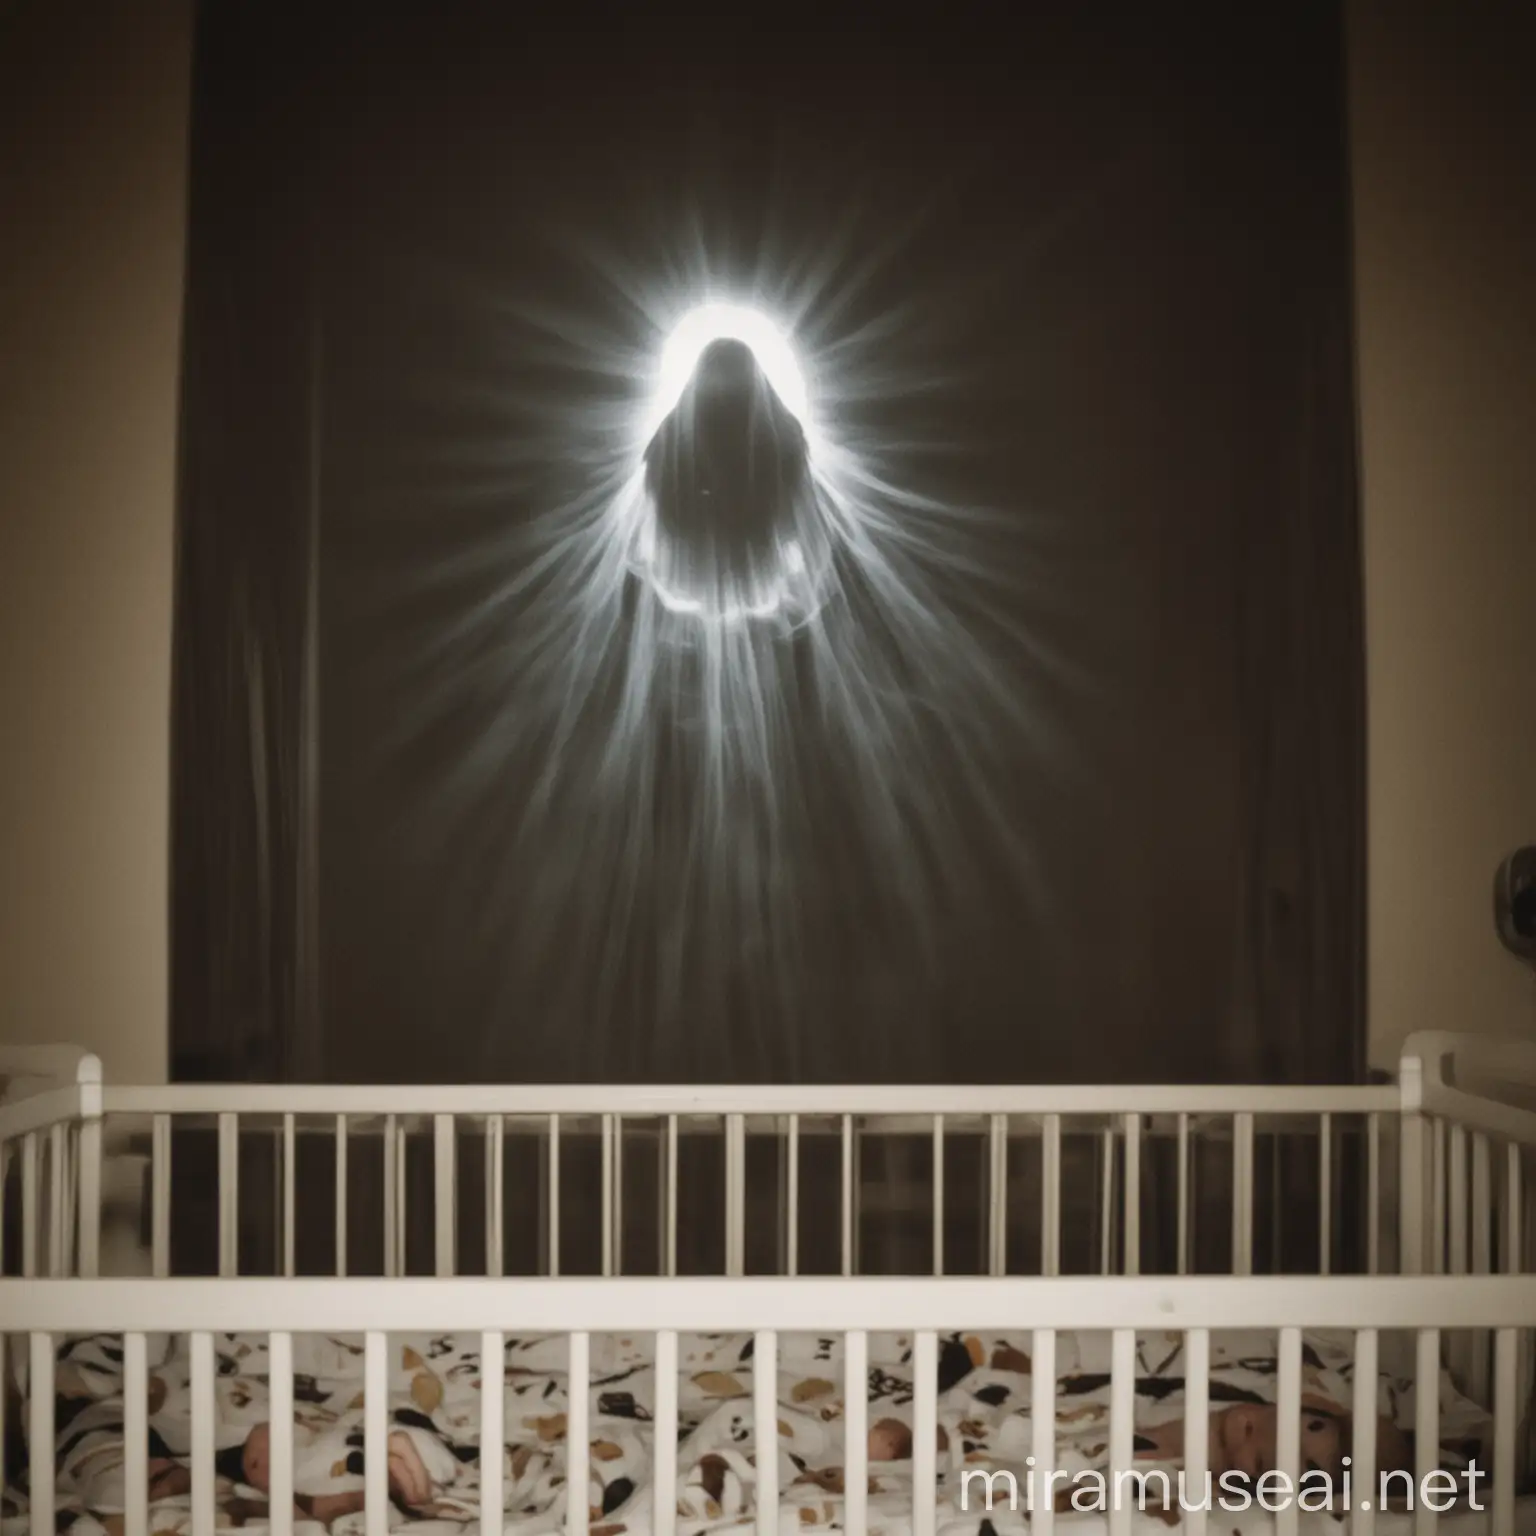 a spooky picture or a fhosrly apparition hovering over a babys cot seen through a baby camera monitor
